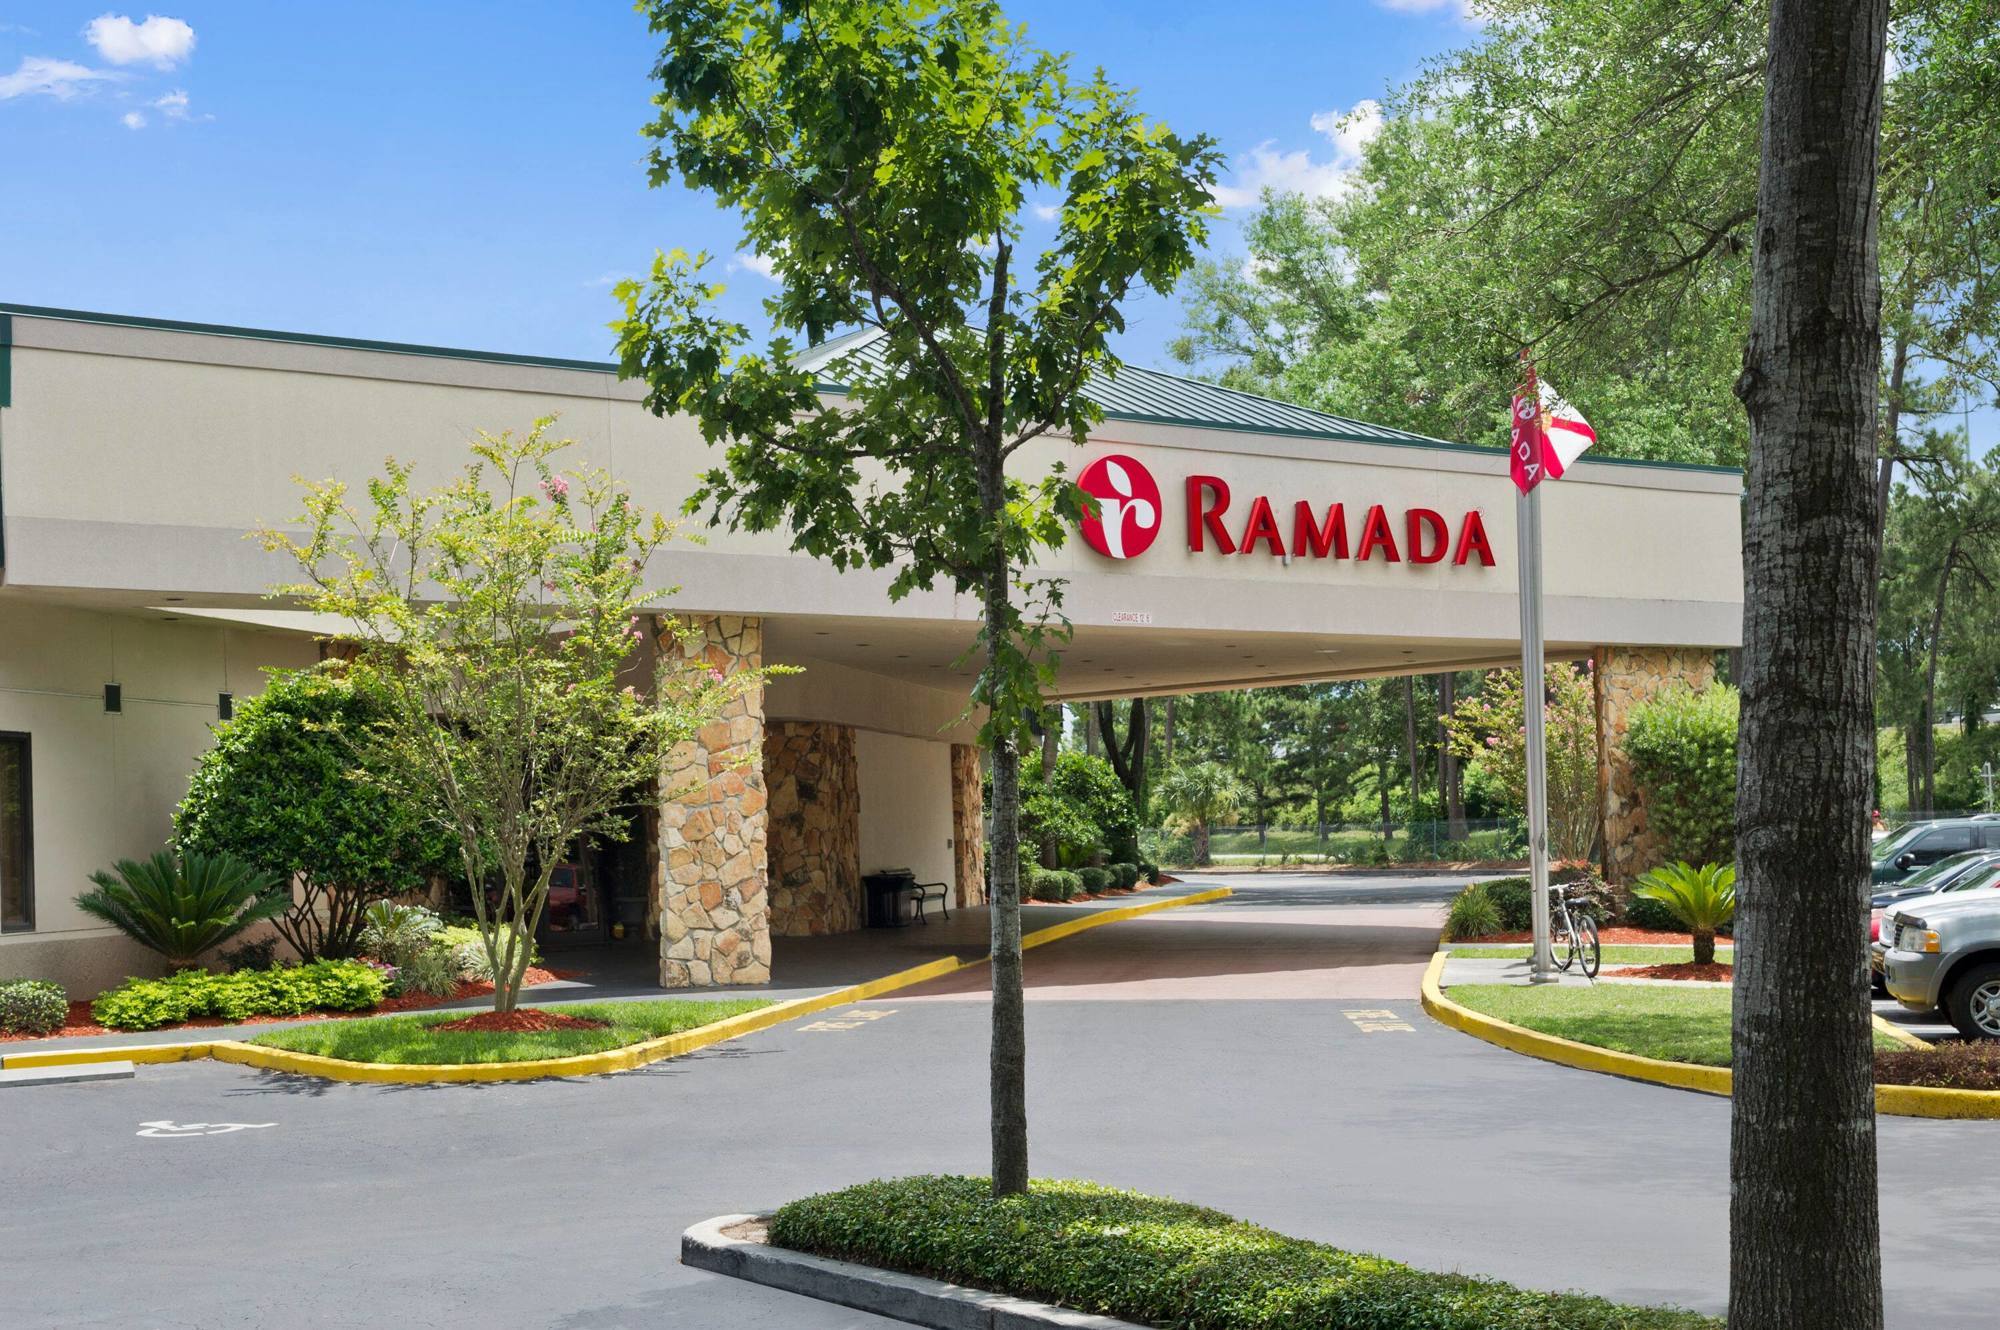 The Ramada by Wyndham Jacksonville Hotel and Conference Center at 3130 Hartley Road in Mandarin comprises a 150-room hotel, Gigi’s restaurant and The Comedy Zone nightclub.